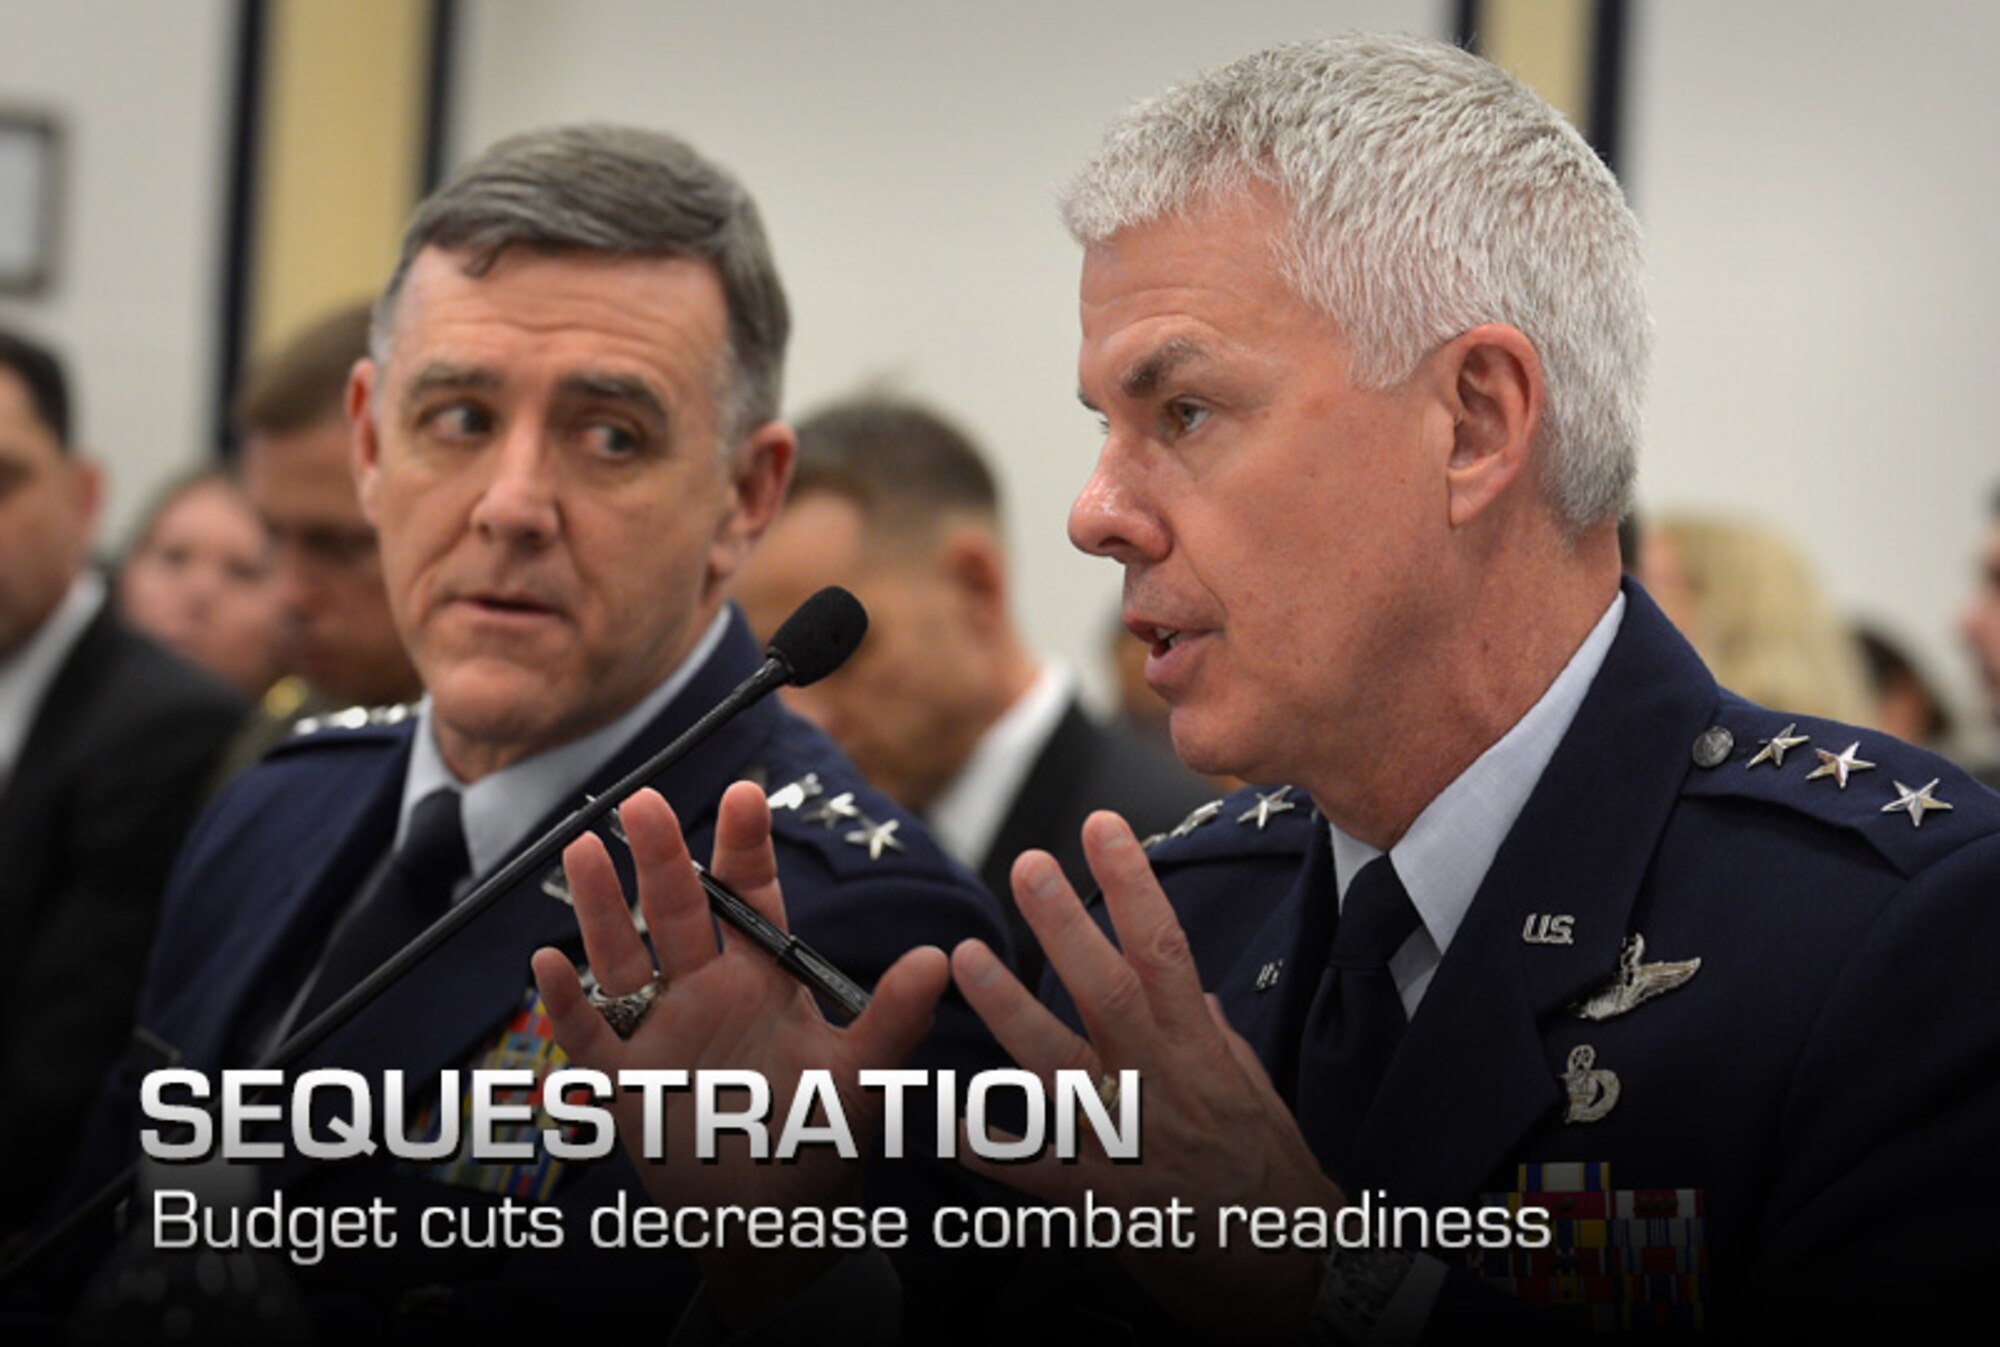 Air Force Lt. Gen. Burton Field looks on while U.S. Air Force Lt. Gen. Charles Davis answers a question posed to him about combat aviation programs being budgeted for fiscal year 2014 during a hearing of the House Armed Services Committee's Tactical Air and Land Forces Subcommittee on Capitol Hill, Washington, D.C., April 17, 2013. Davis is the Military Deputy, Office of the Assistant Secretary of the Air Force for Acquisition. He is responsible for research and development, test, production and modernization of Air Force programs. Field is deputy chief of staff for operations, plans and requirements and also serves as the Air Force operations deputy to the Joint Chiefs of Staff. . (U.S. Air Force photo/Jim Varhegyi)